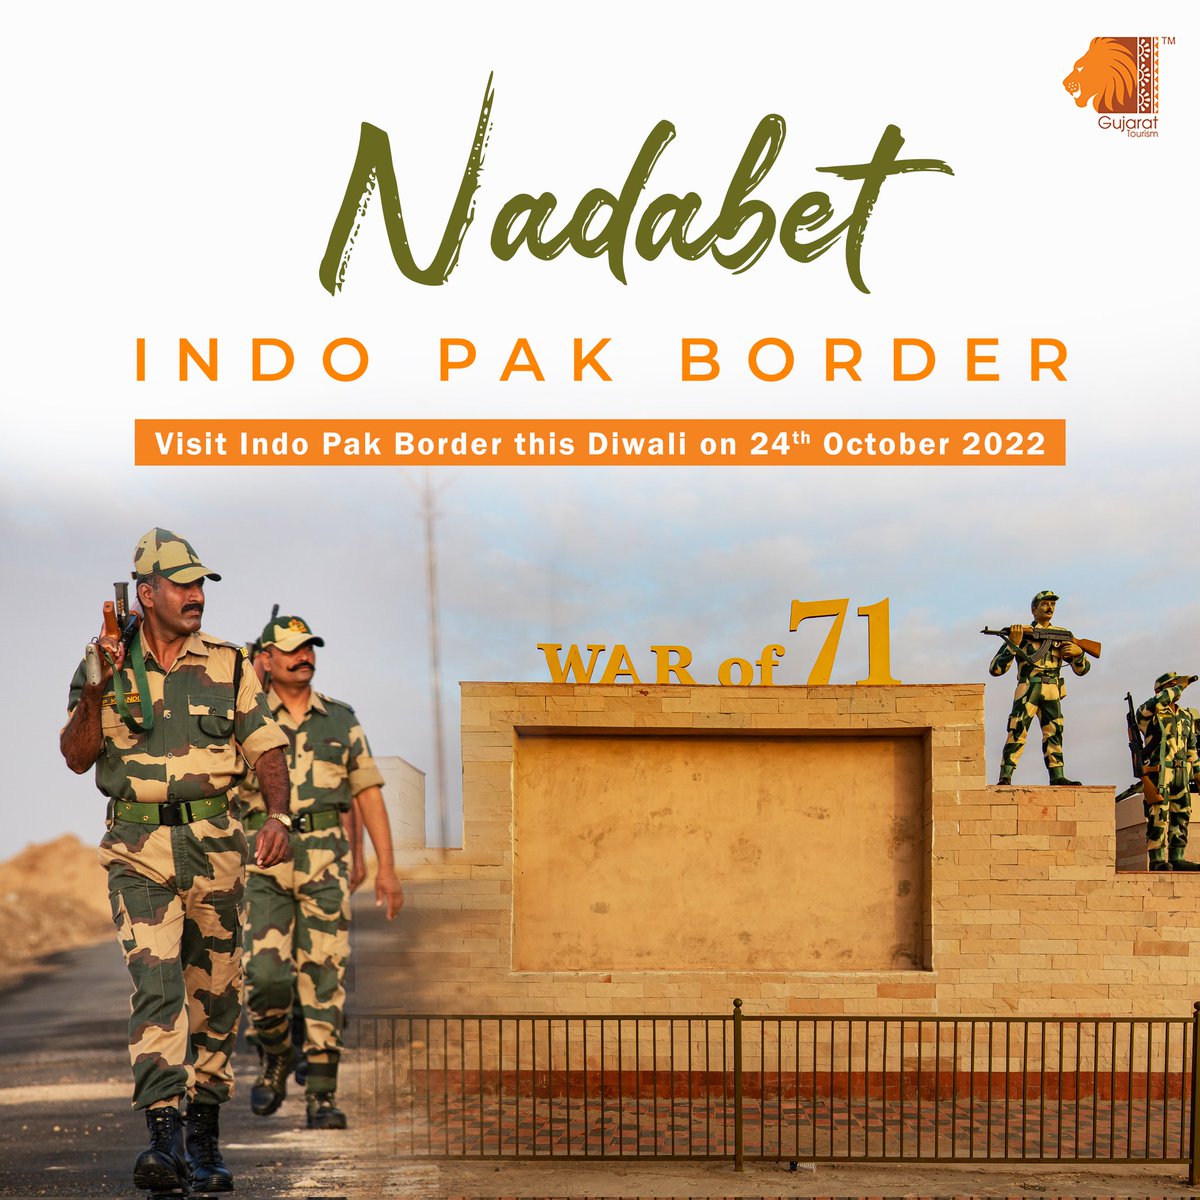 Do visit this unique #Nadabet Indo-Pak Border destination on 24th October 2022 honoring the lives and history of the #BSF Jawans who have stood watchfully at our nation's frontier since 1965. #gujarattourim #indopakborder @purneshmodi @iArvindRaiyani @hareets @AlokPandey_IAS